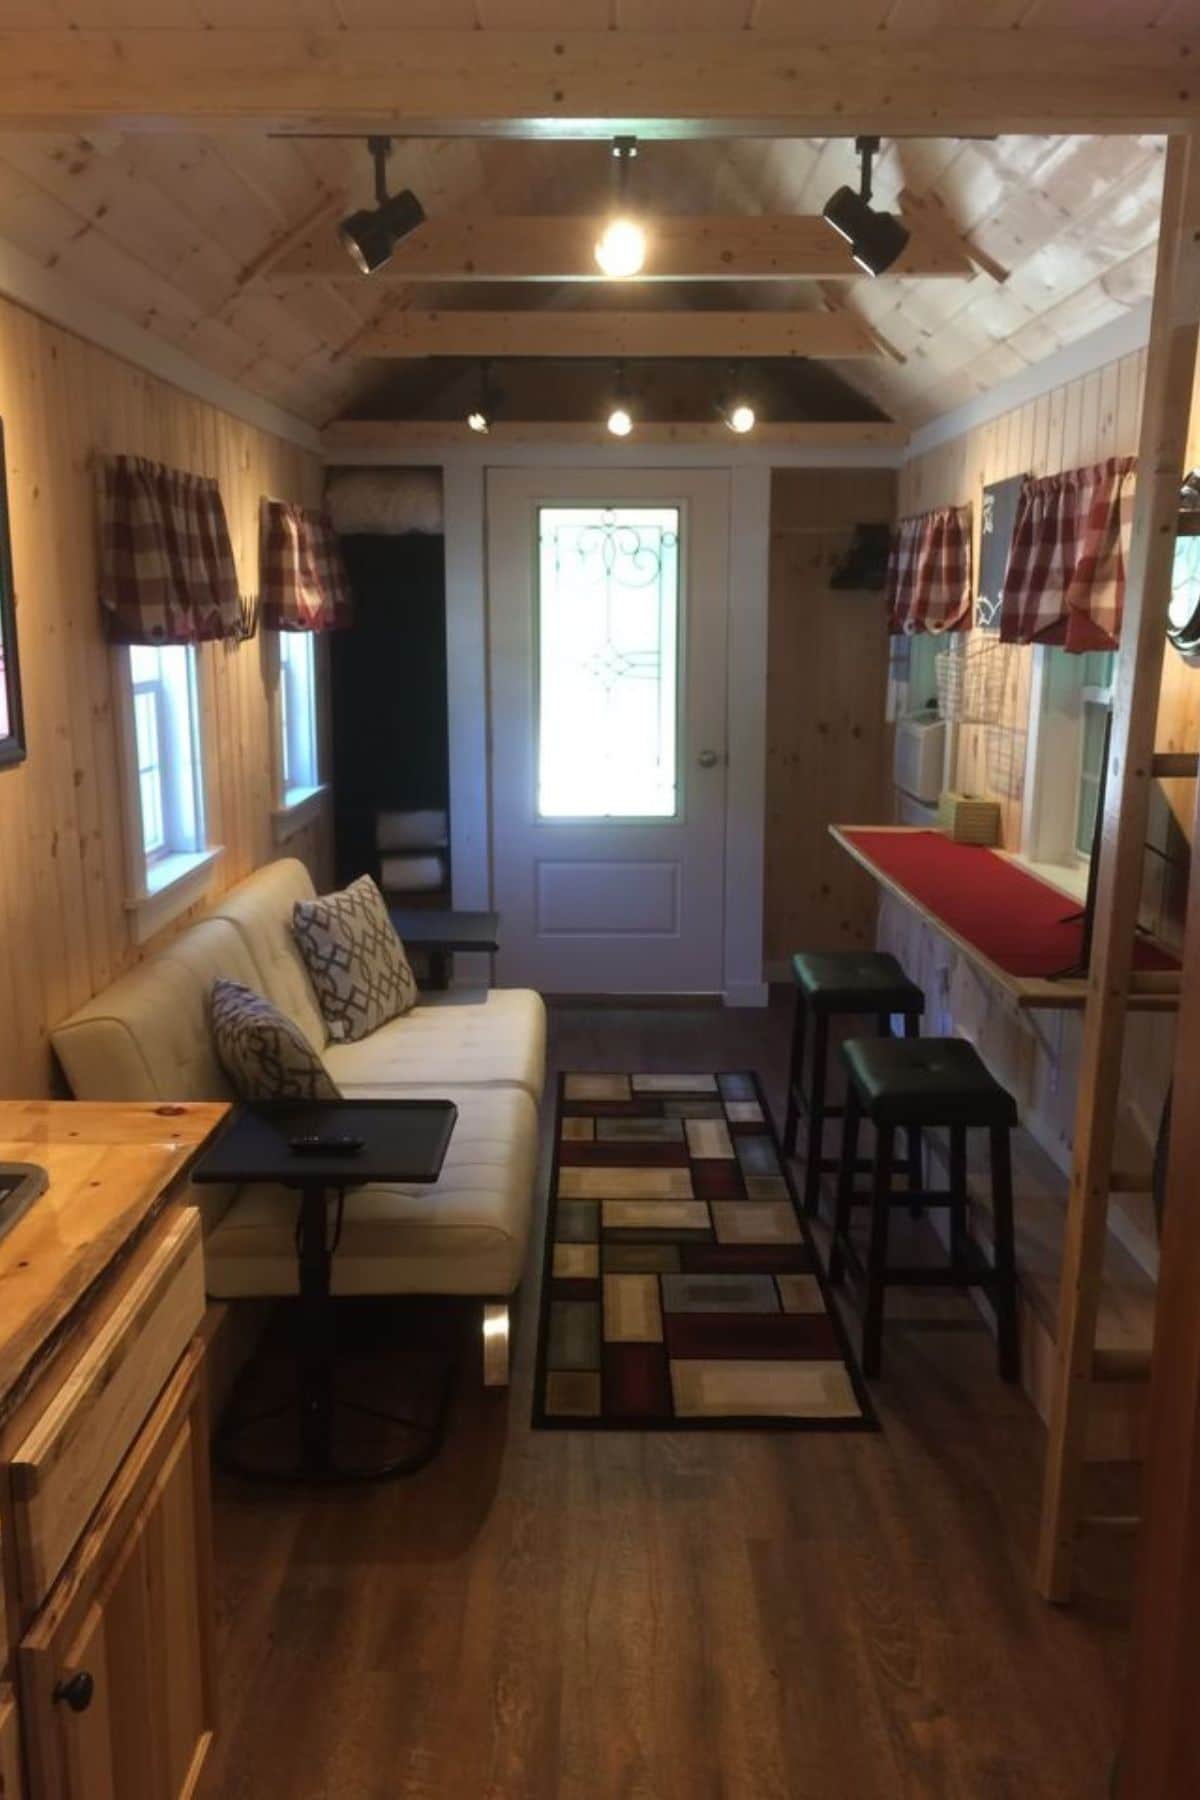 view of front door of tiny home from kitchen looking over living area